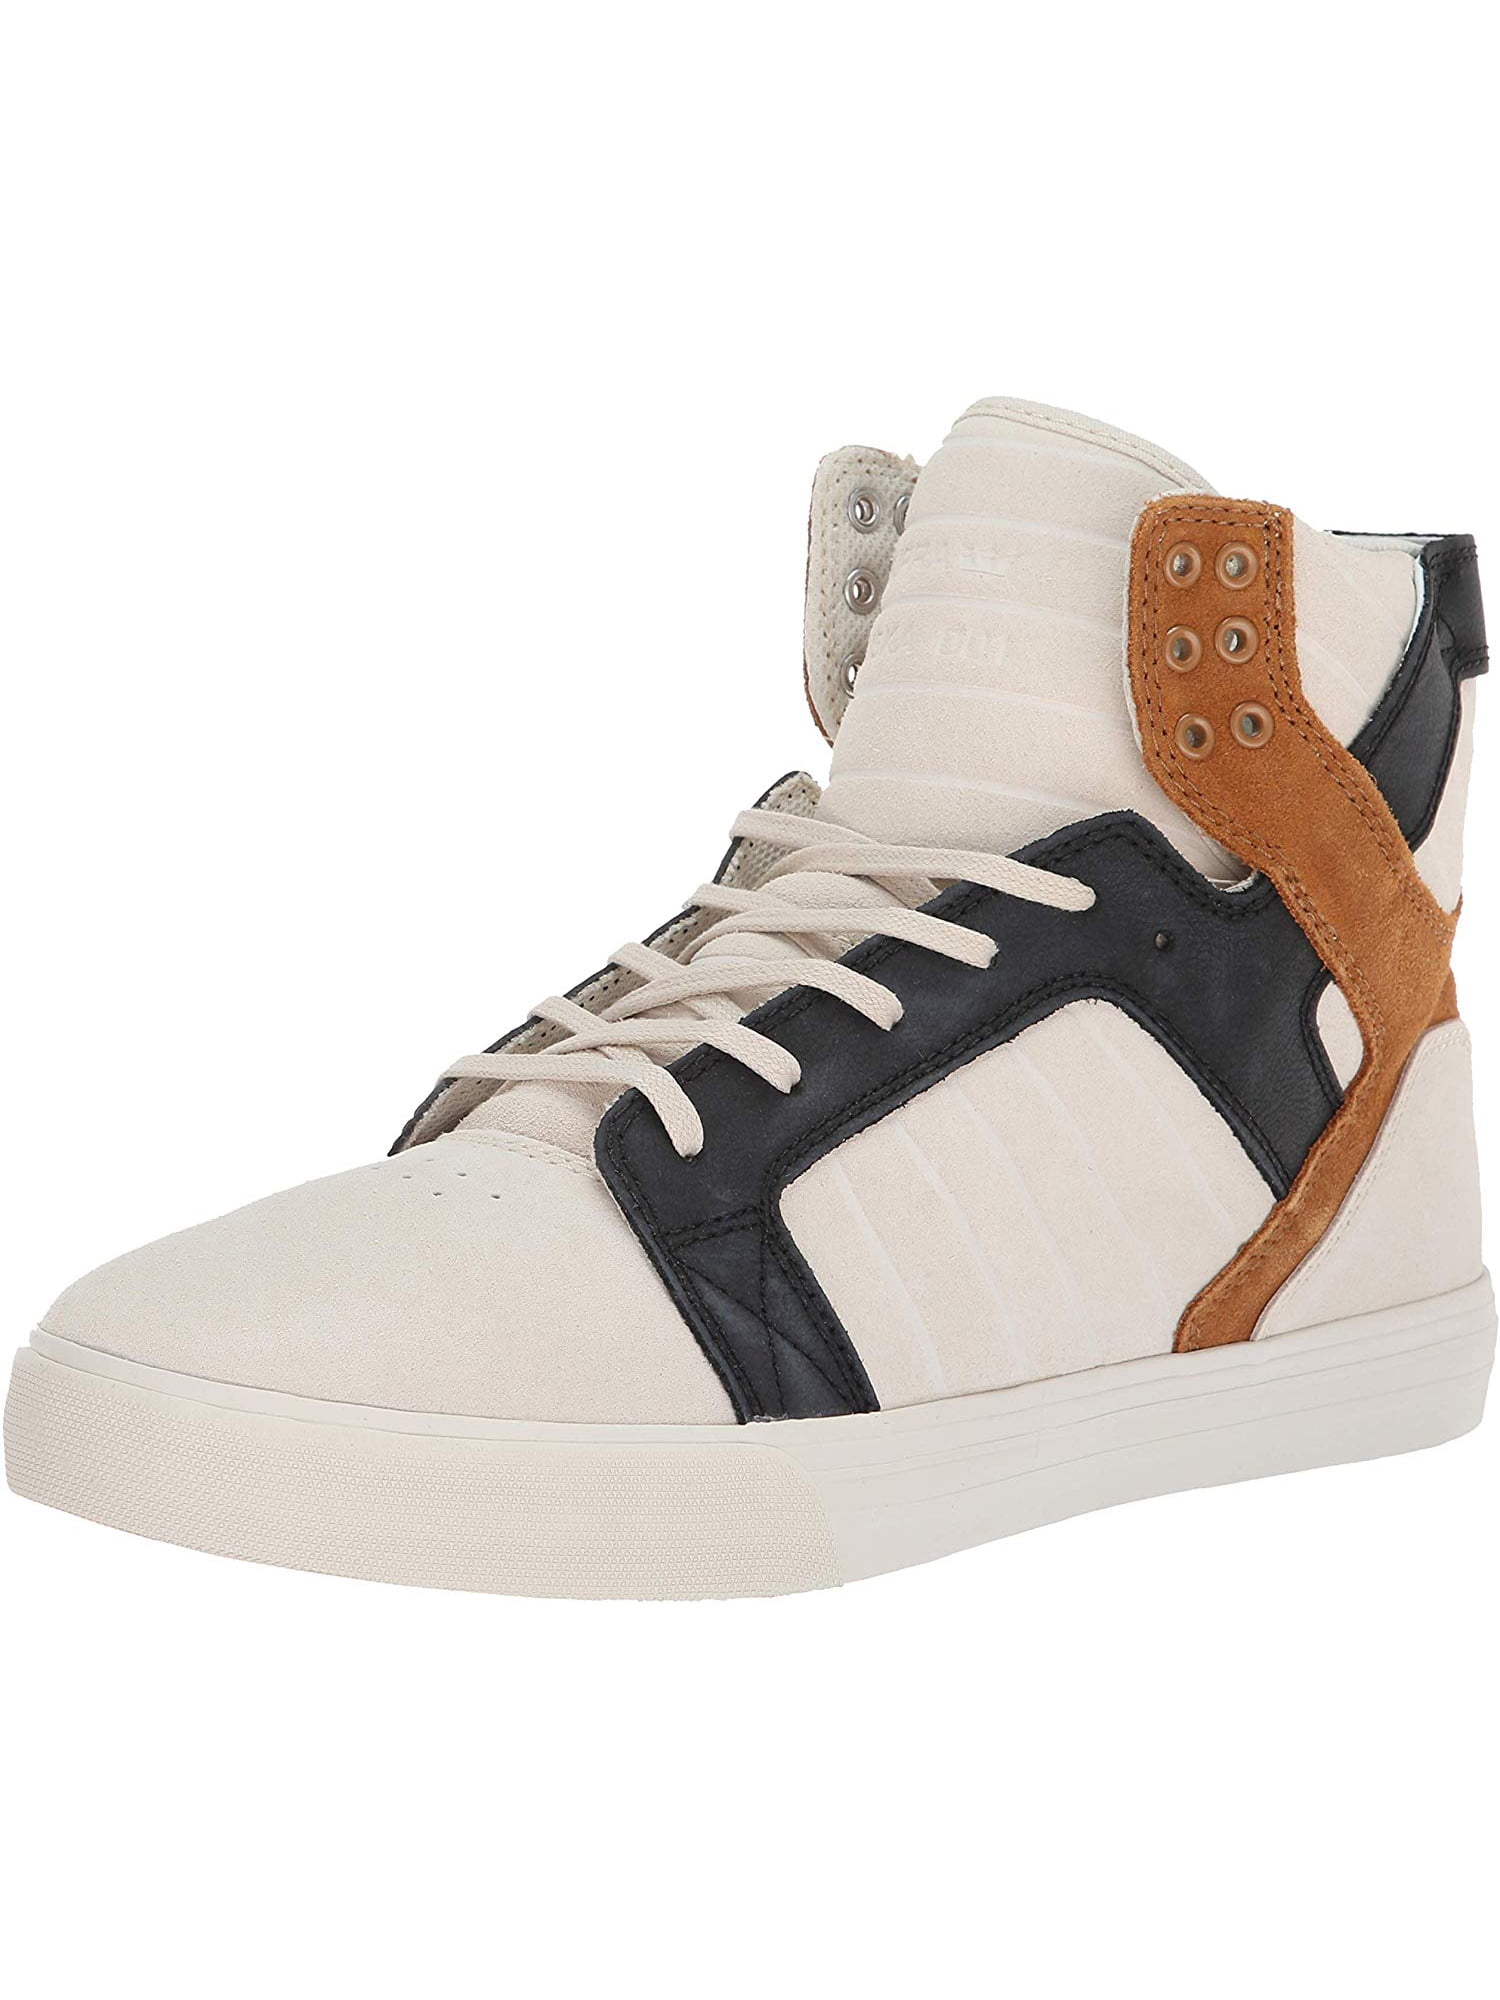 Supra Skytop 77 06578-151-M Mens White Leather High Top Skate Sneakers Shoes 